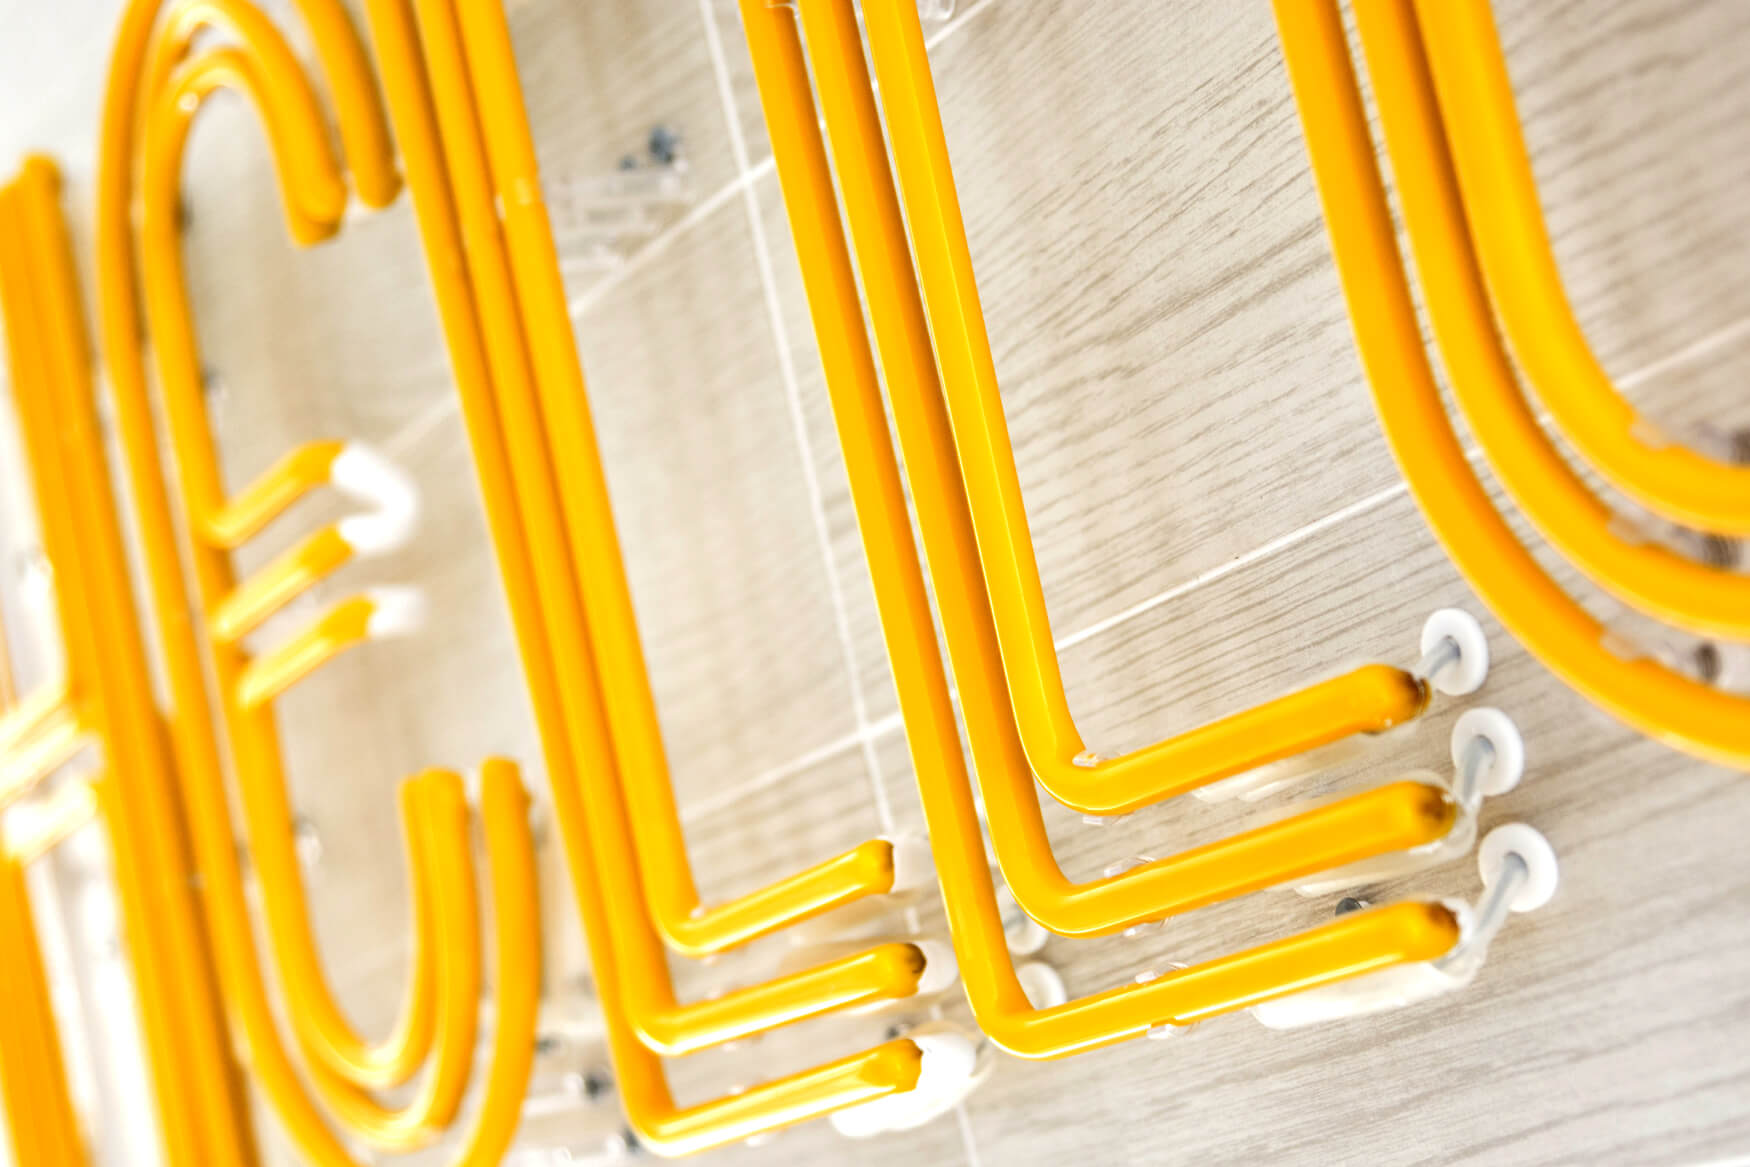 CIAO CIAO - hello-neon-helo-color-yellow-neon-neon-neon-poland-neon-on-tiles-neon-on-panels-on-the-wall-neon-in-the-lobby-neon-in-office-neon-trojmiasto-en